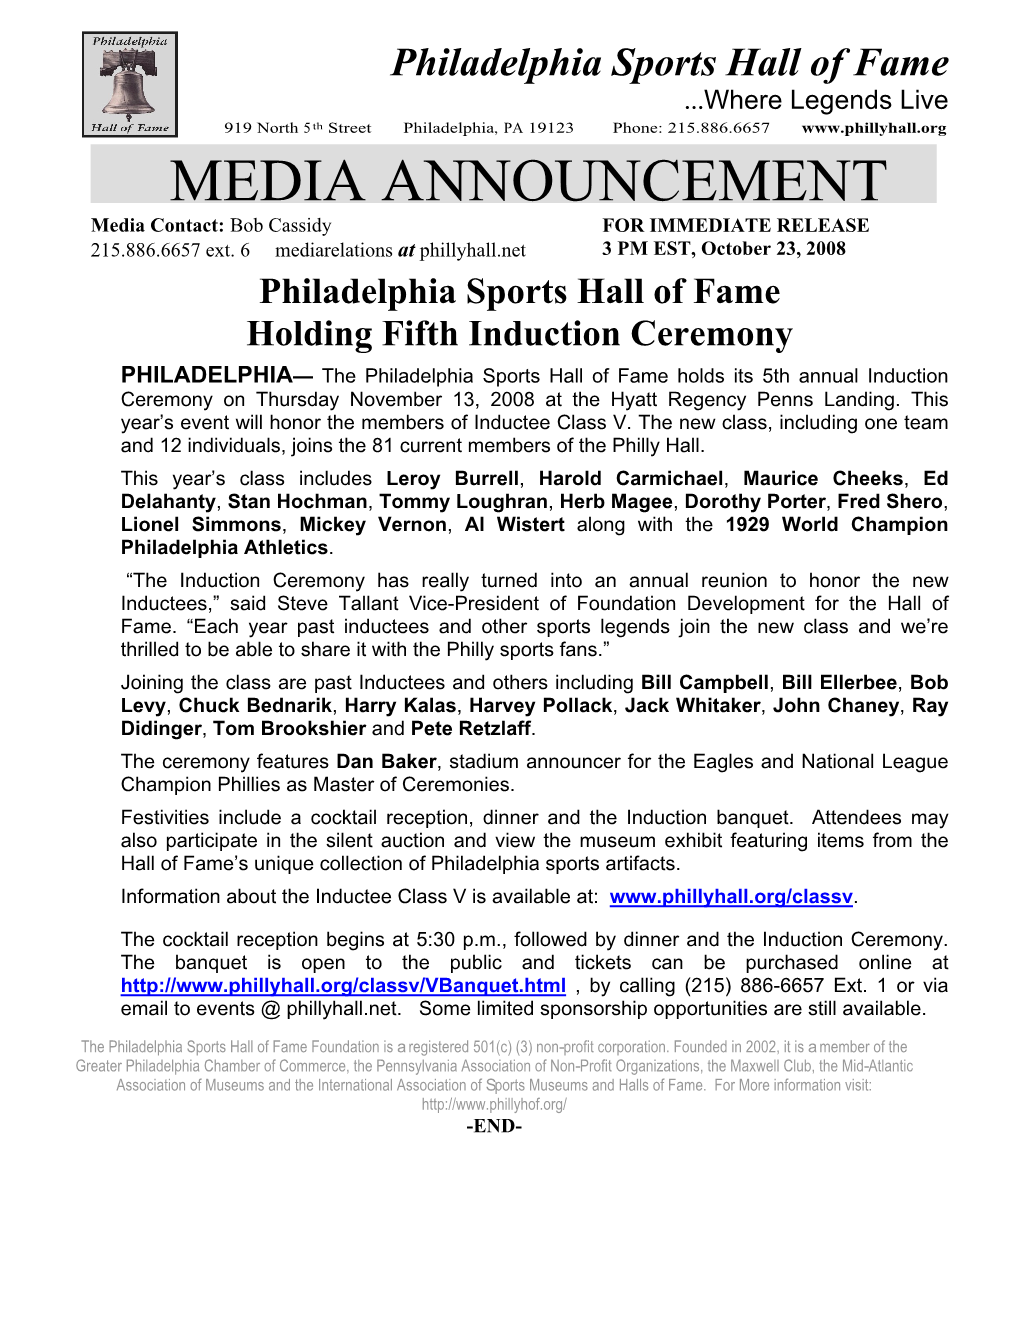 MEDIA ANNOUNCEMENT Media Contact: Bob Cassidy for IMMEDIATE RELEASE 215.886.6657 Ext